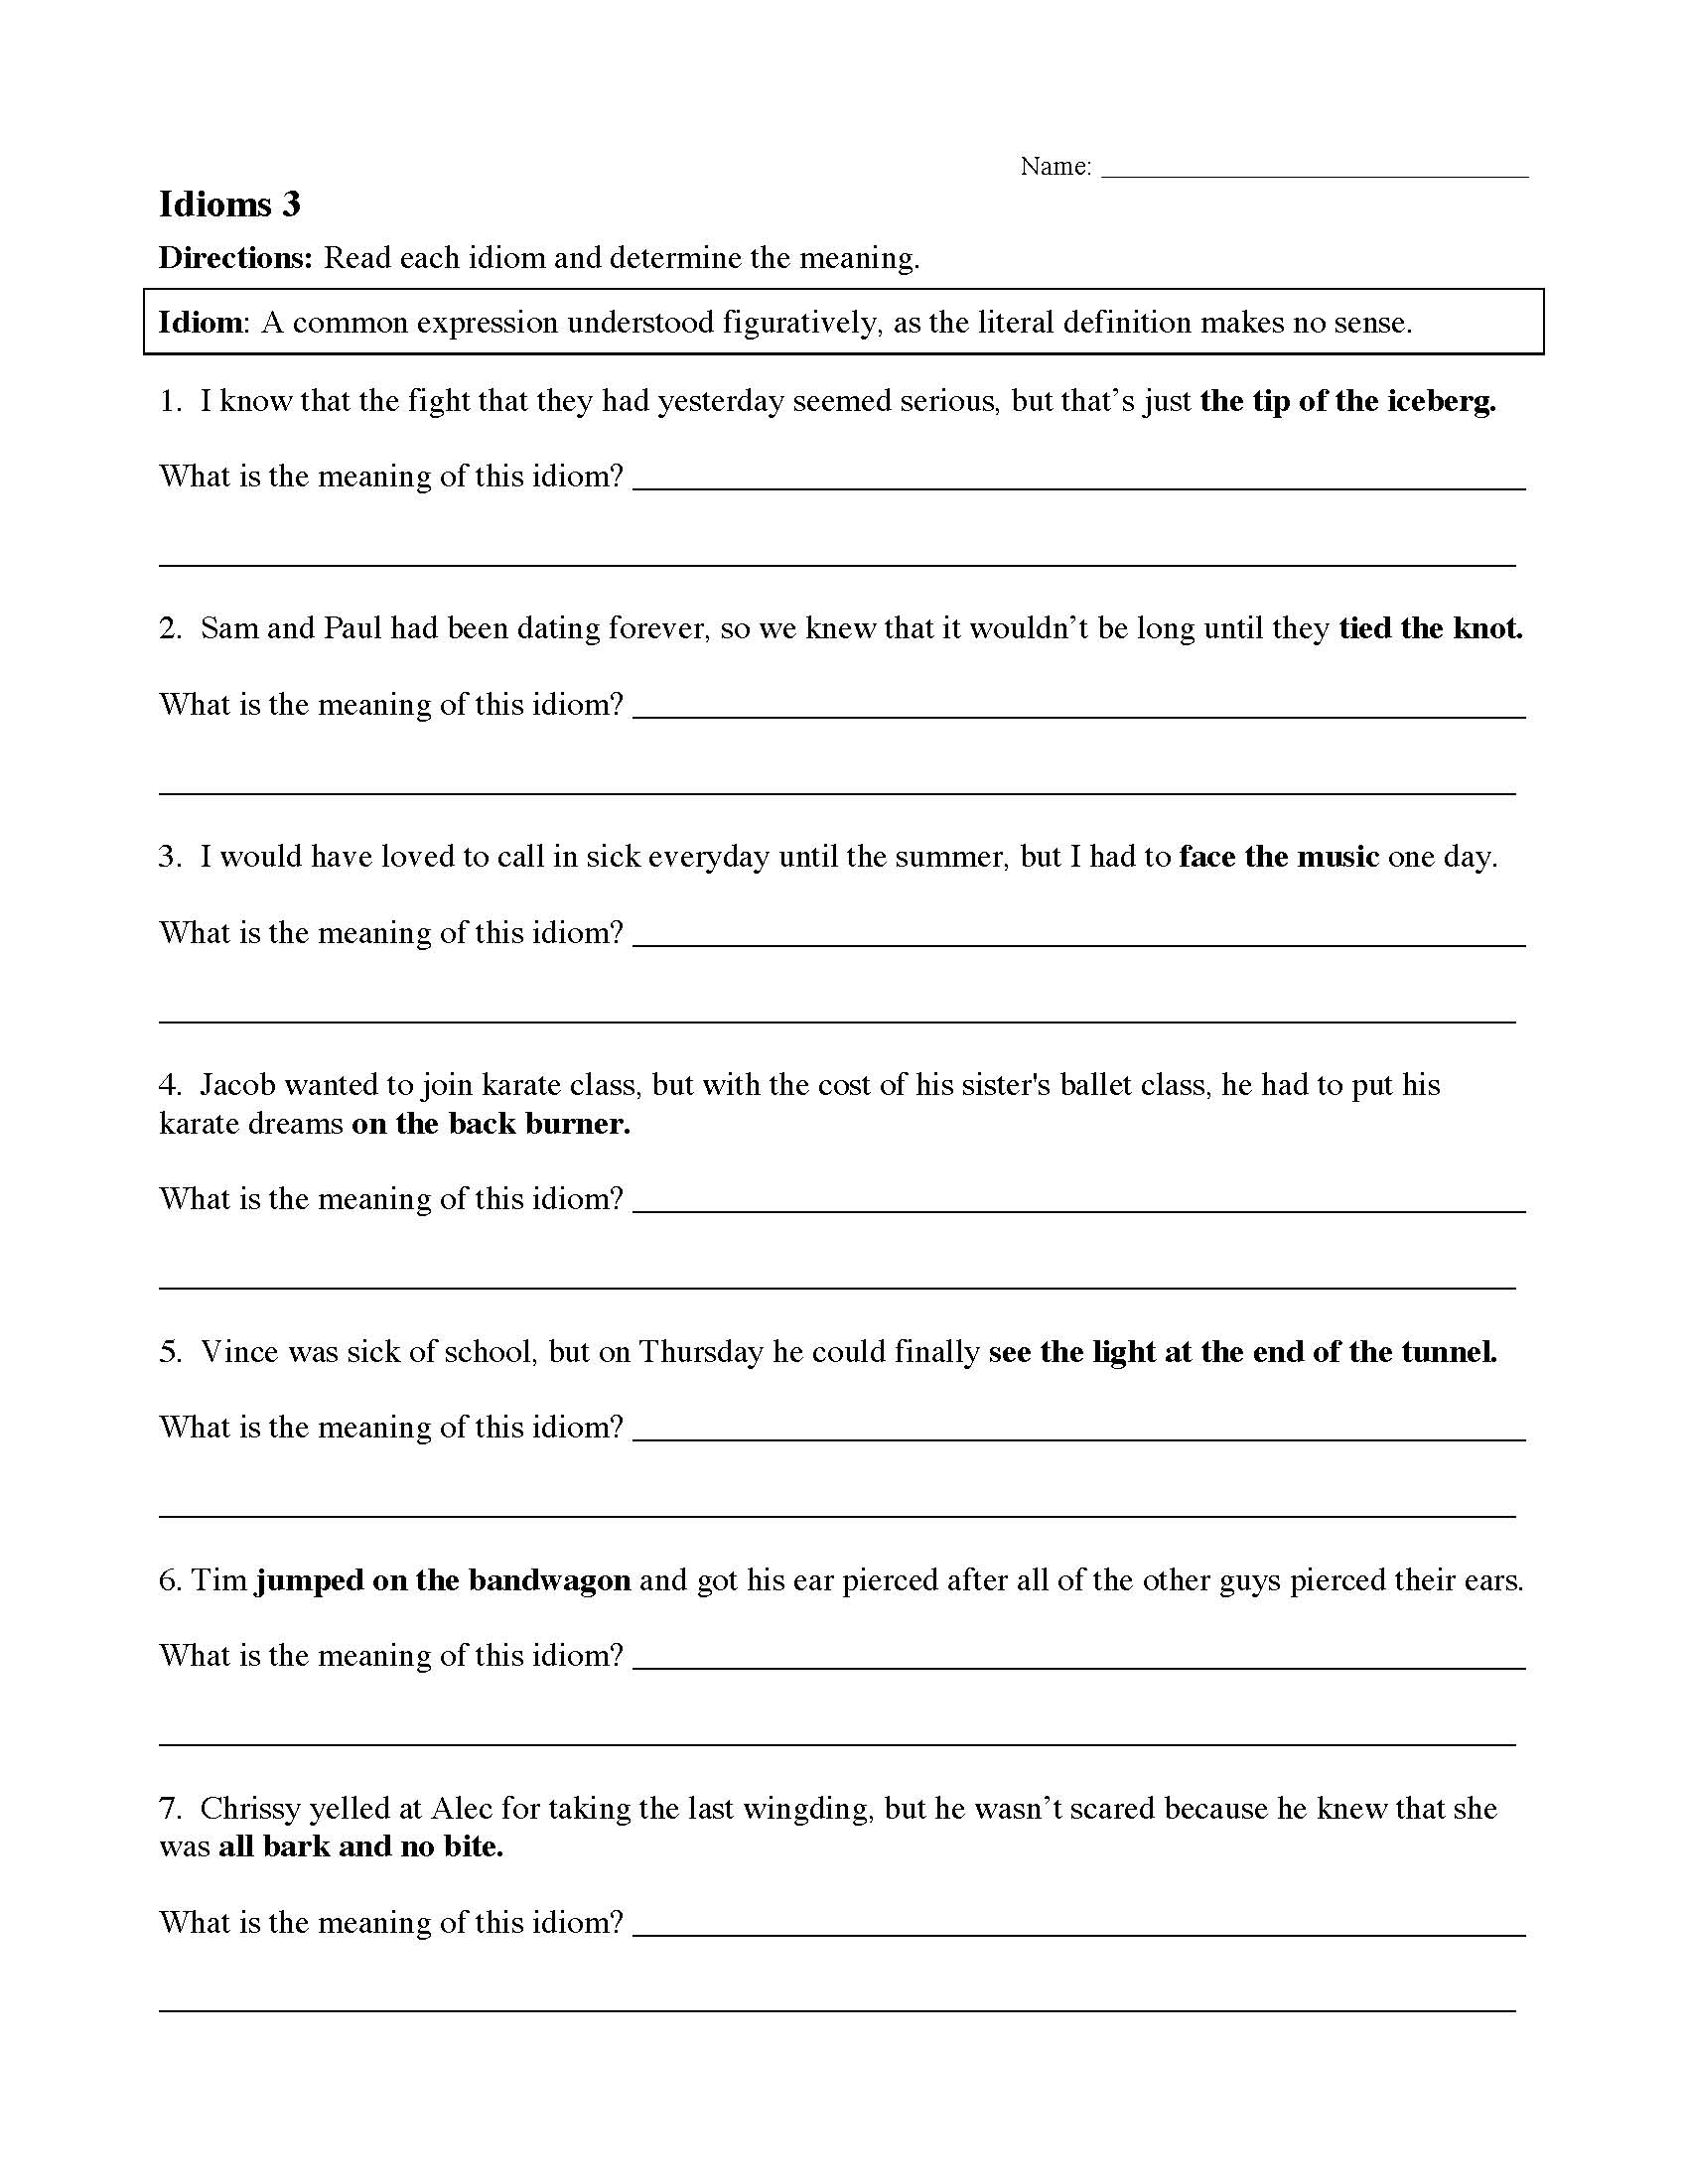 This is a preview image of Idiom Worksheet 3. Click on it to enlarge it or view the source file.